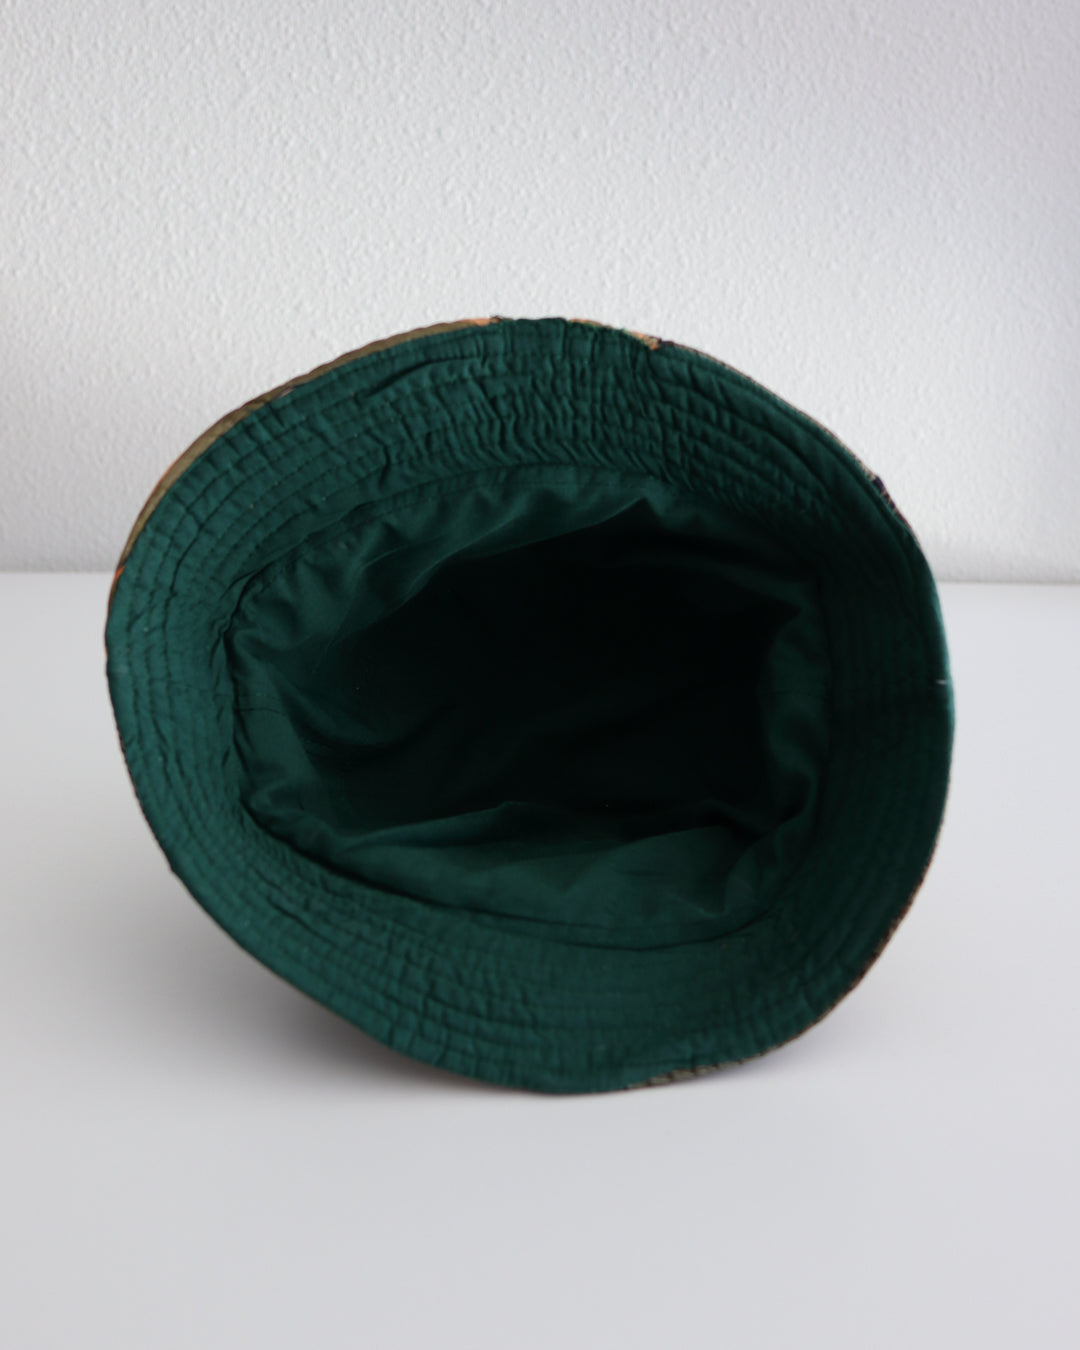 Olive Green Upcycled Tie Bucket Hat